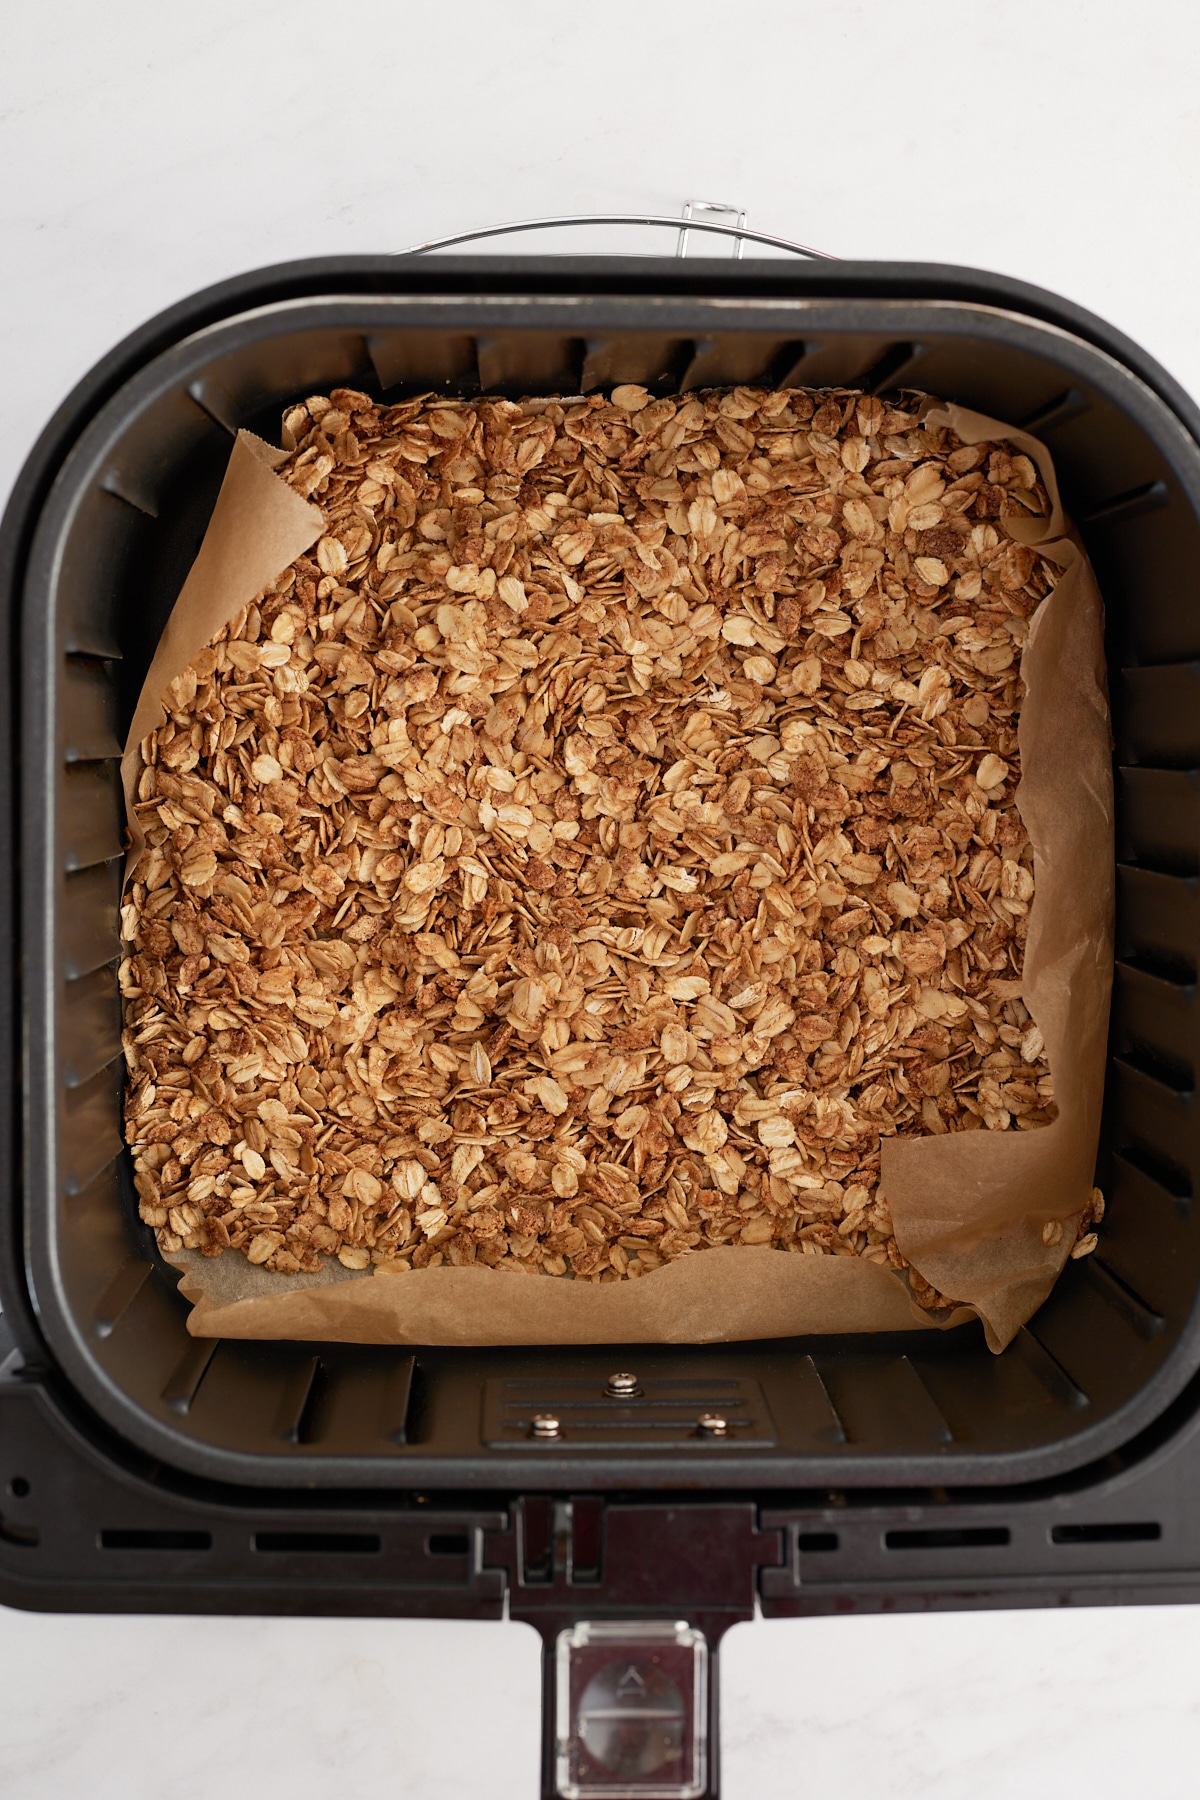 The cooked granola in an air fryer basket.